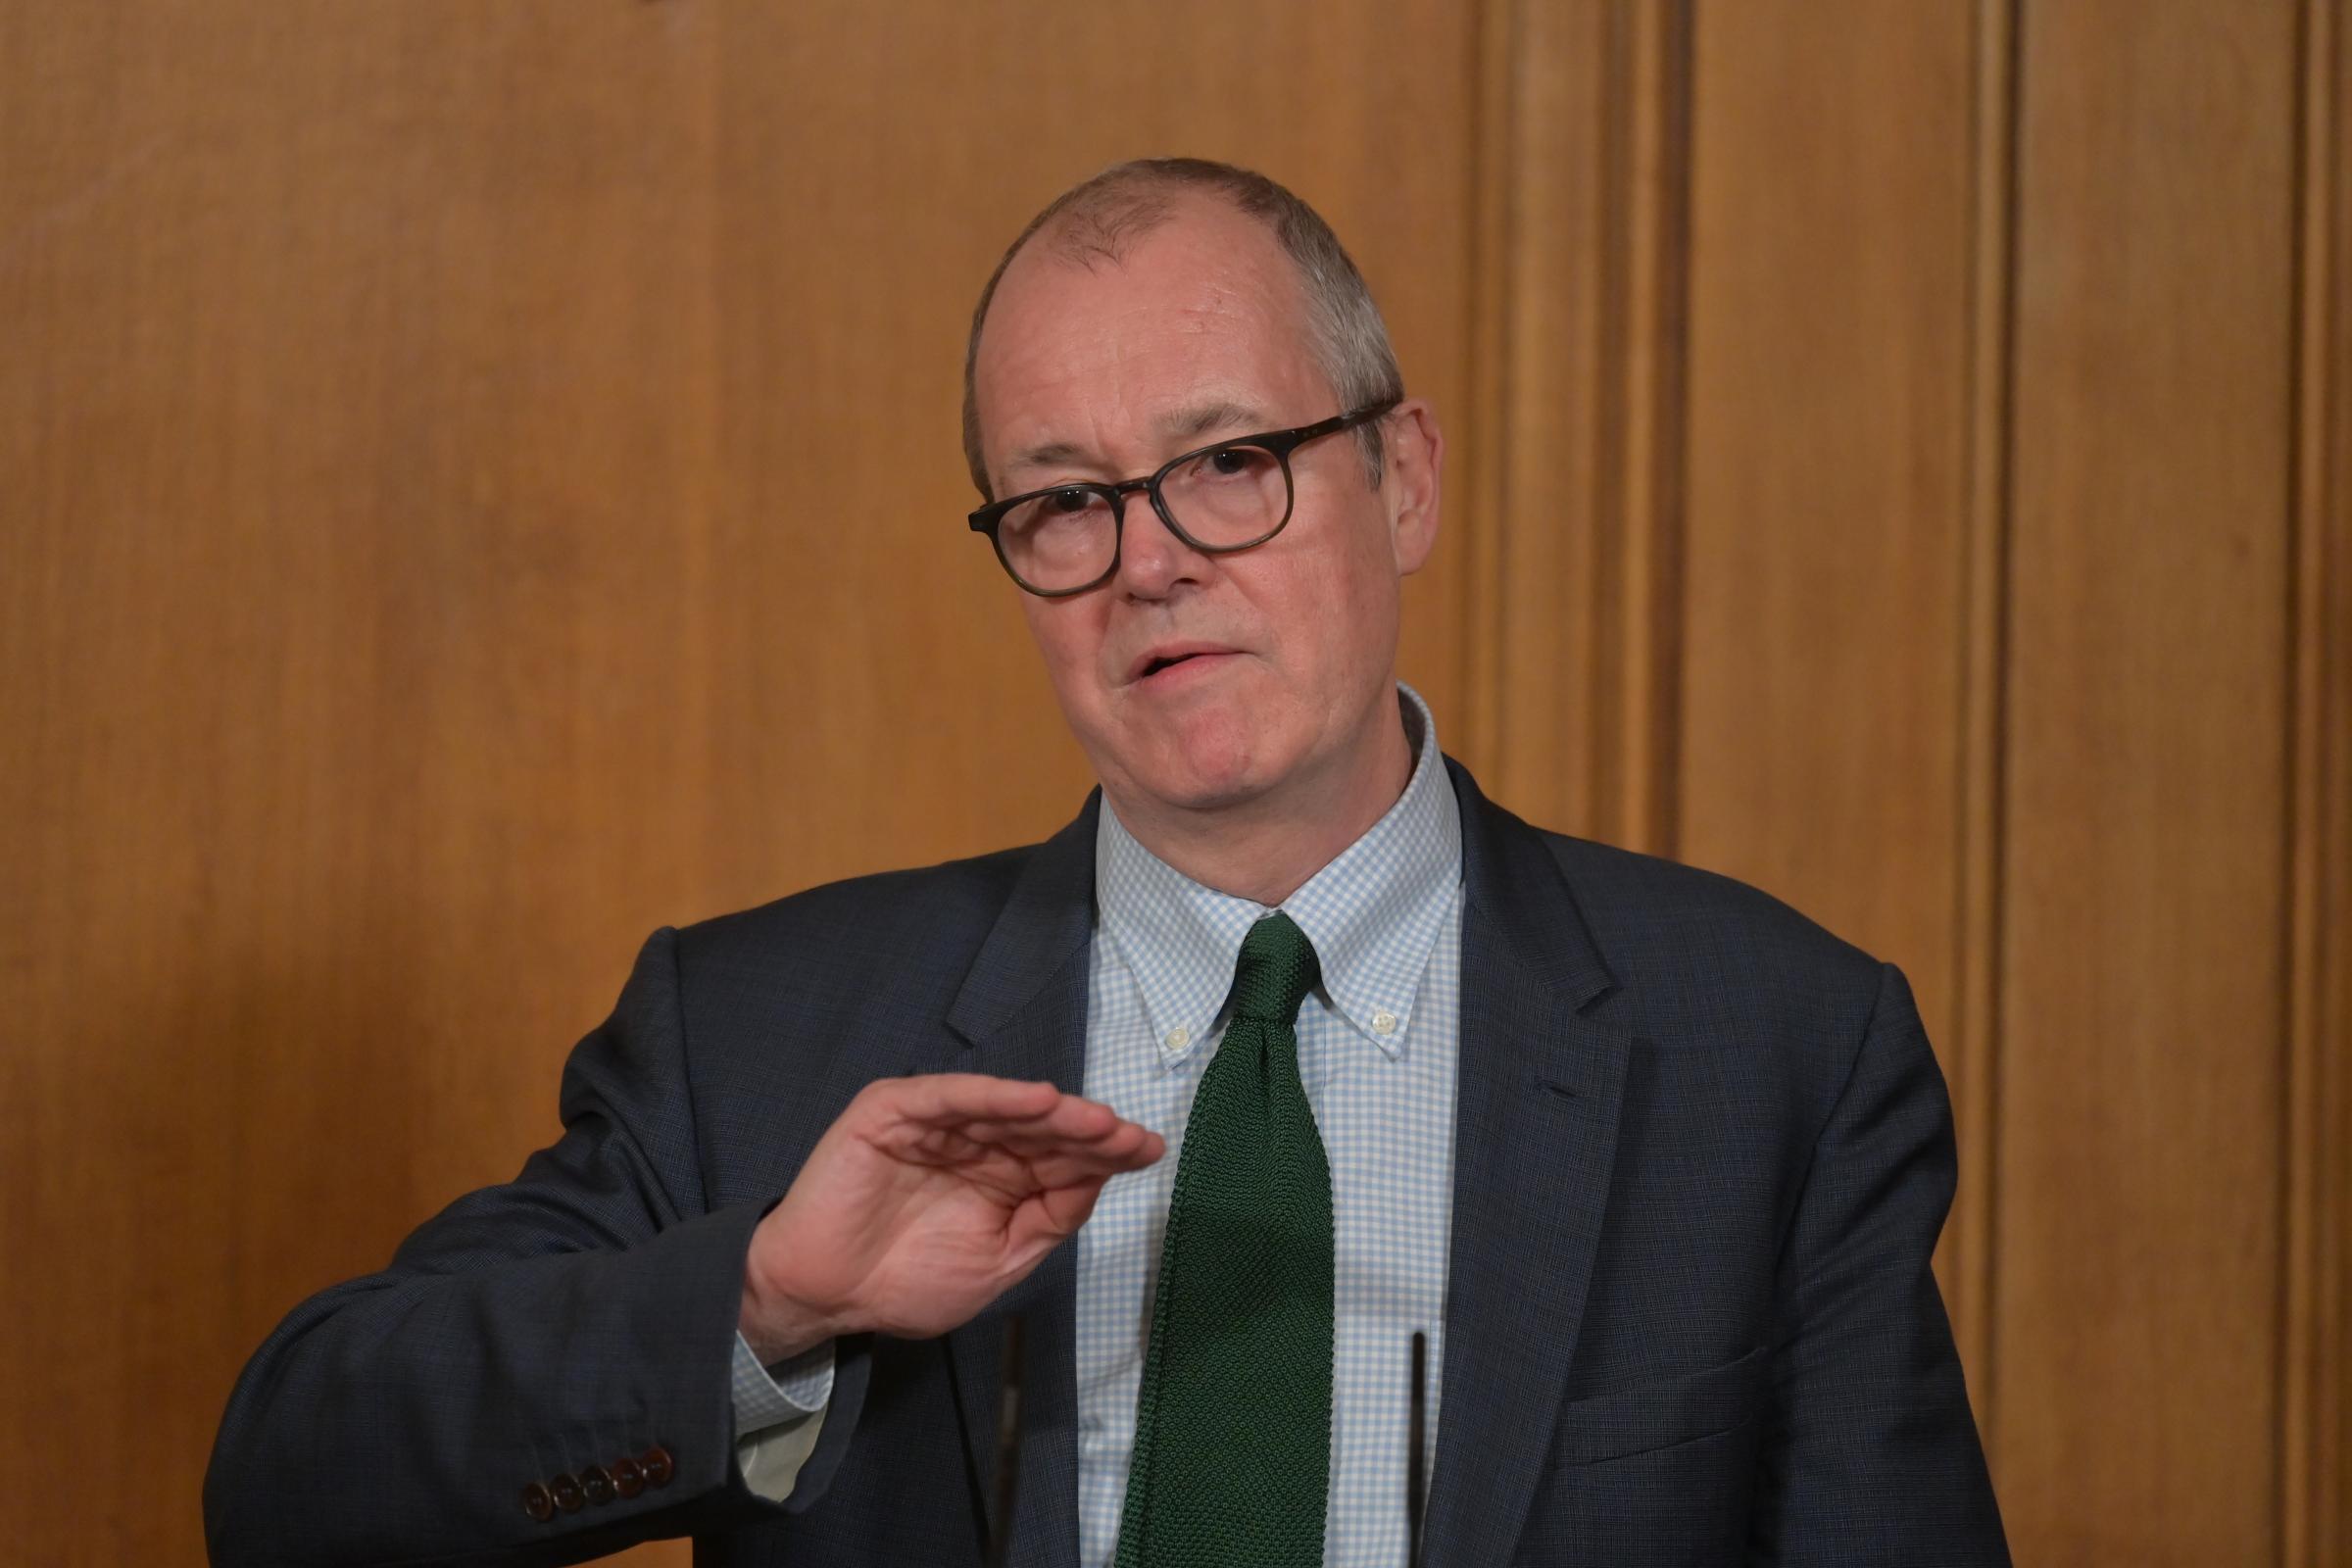 Chief Scientific Adviser Sir Patrick Vallance during a media briefing in Downing Street, London, on coronavirus (Covid-19). Picture date: Wednesday January 27, 2021..